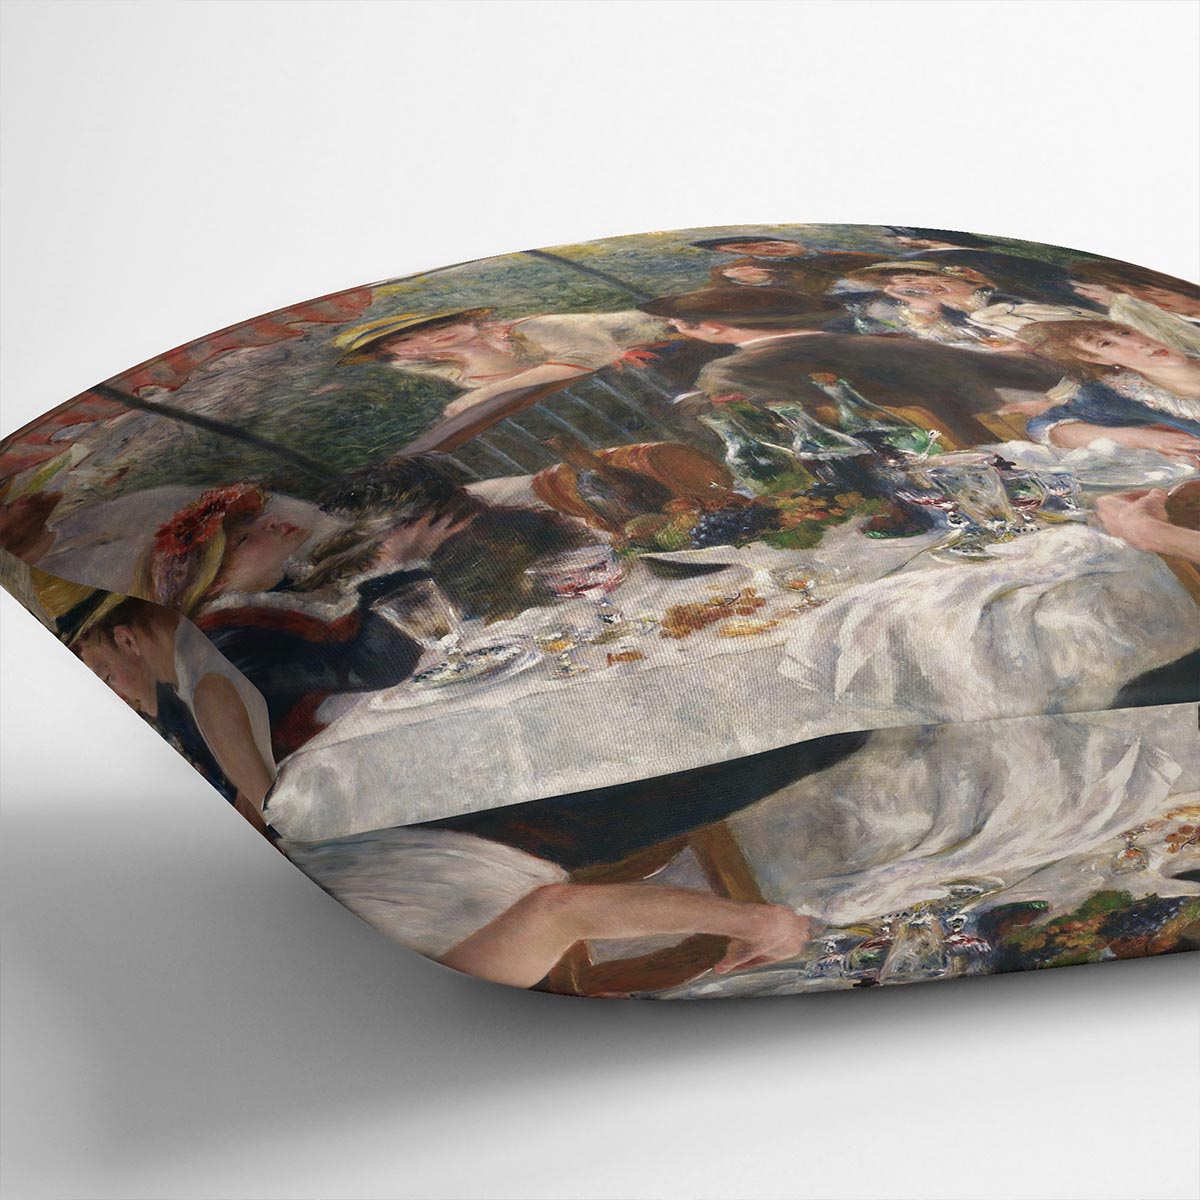 Luncheon of the Boating Party by Renoir Cushion